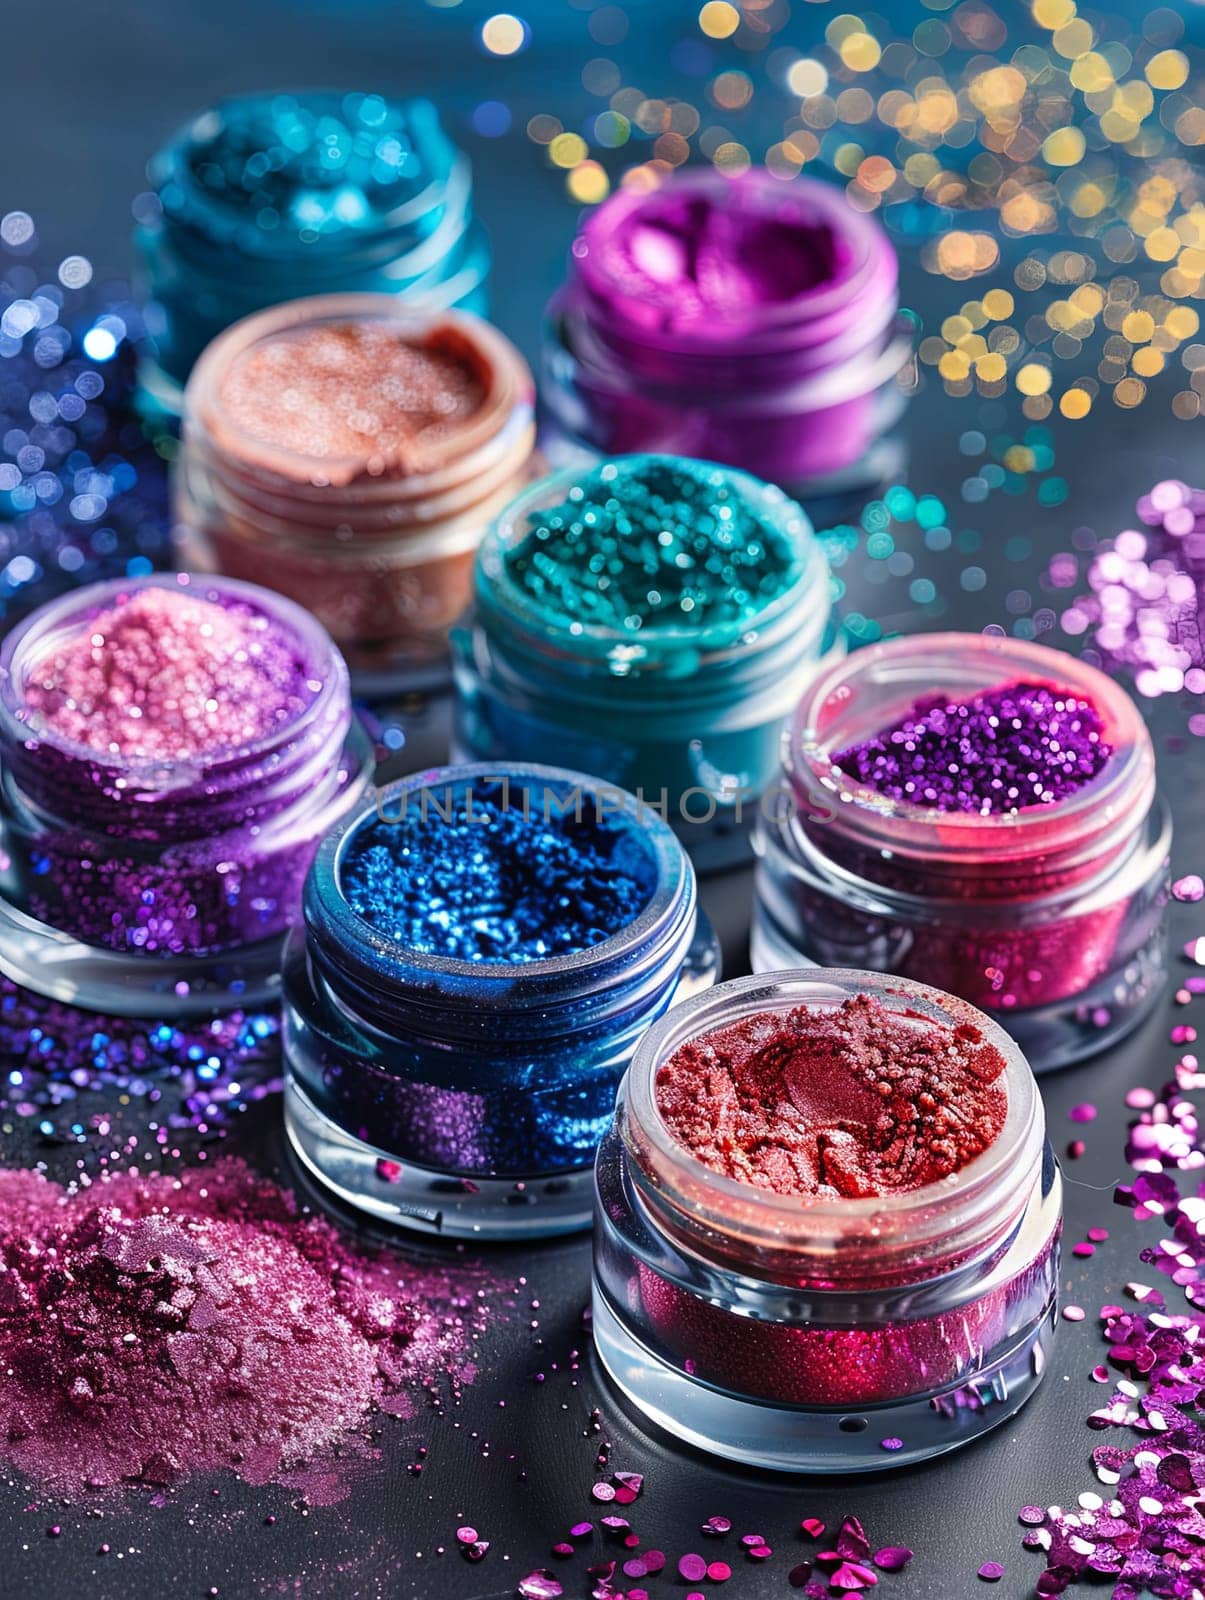 An assortment of colorful makeup pigments and powders in small jars, arranged artistically on a black surface.